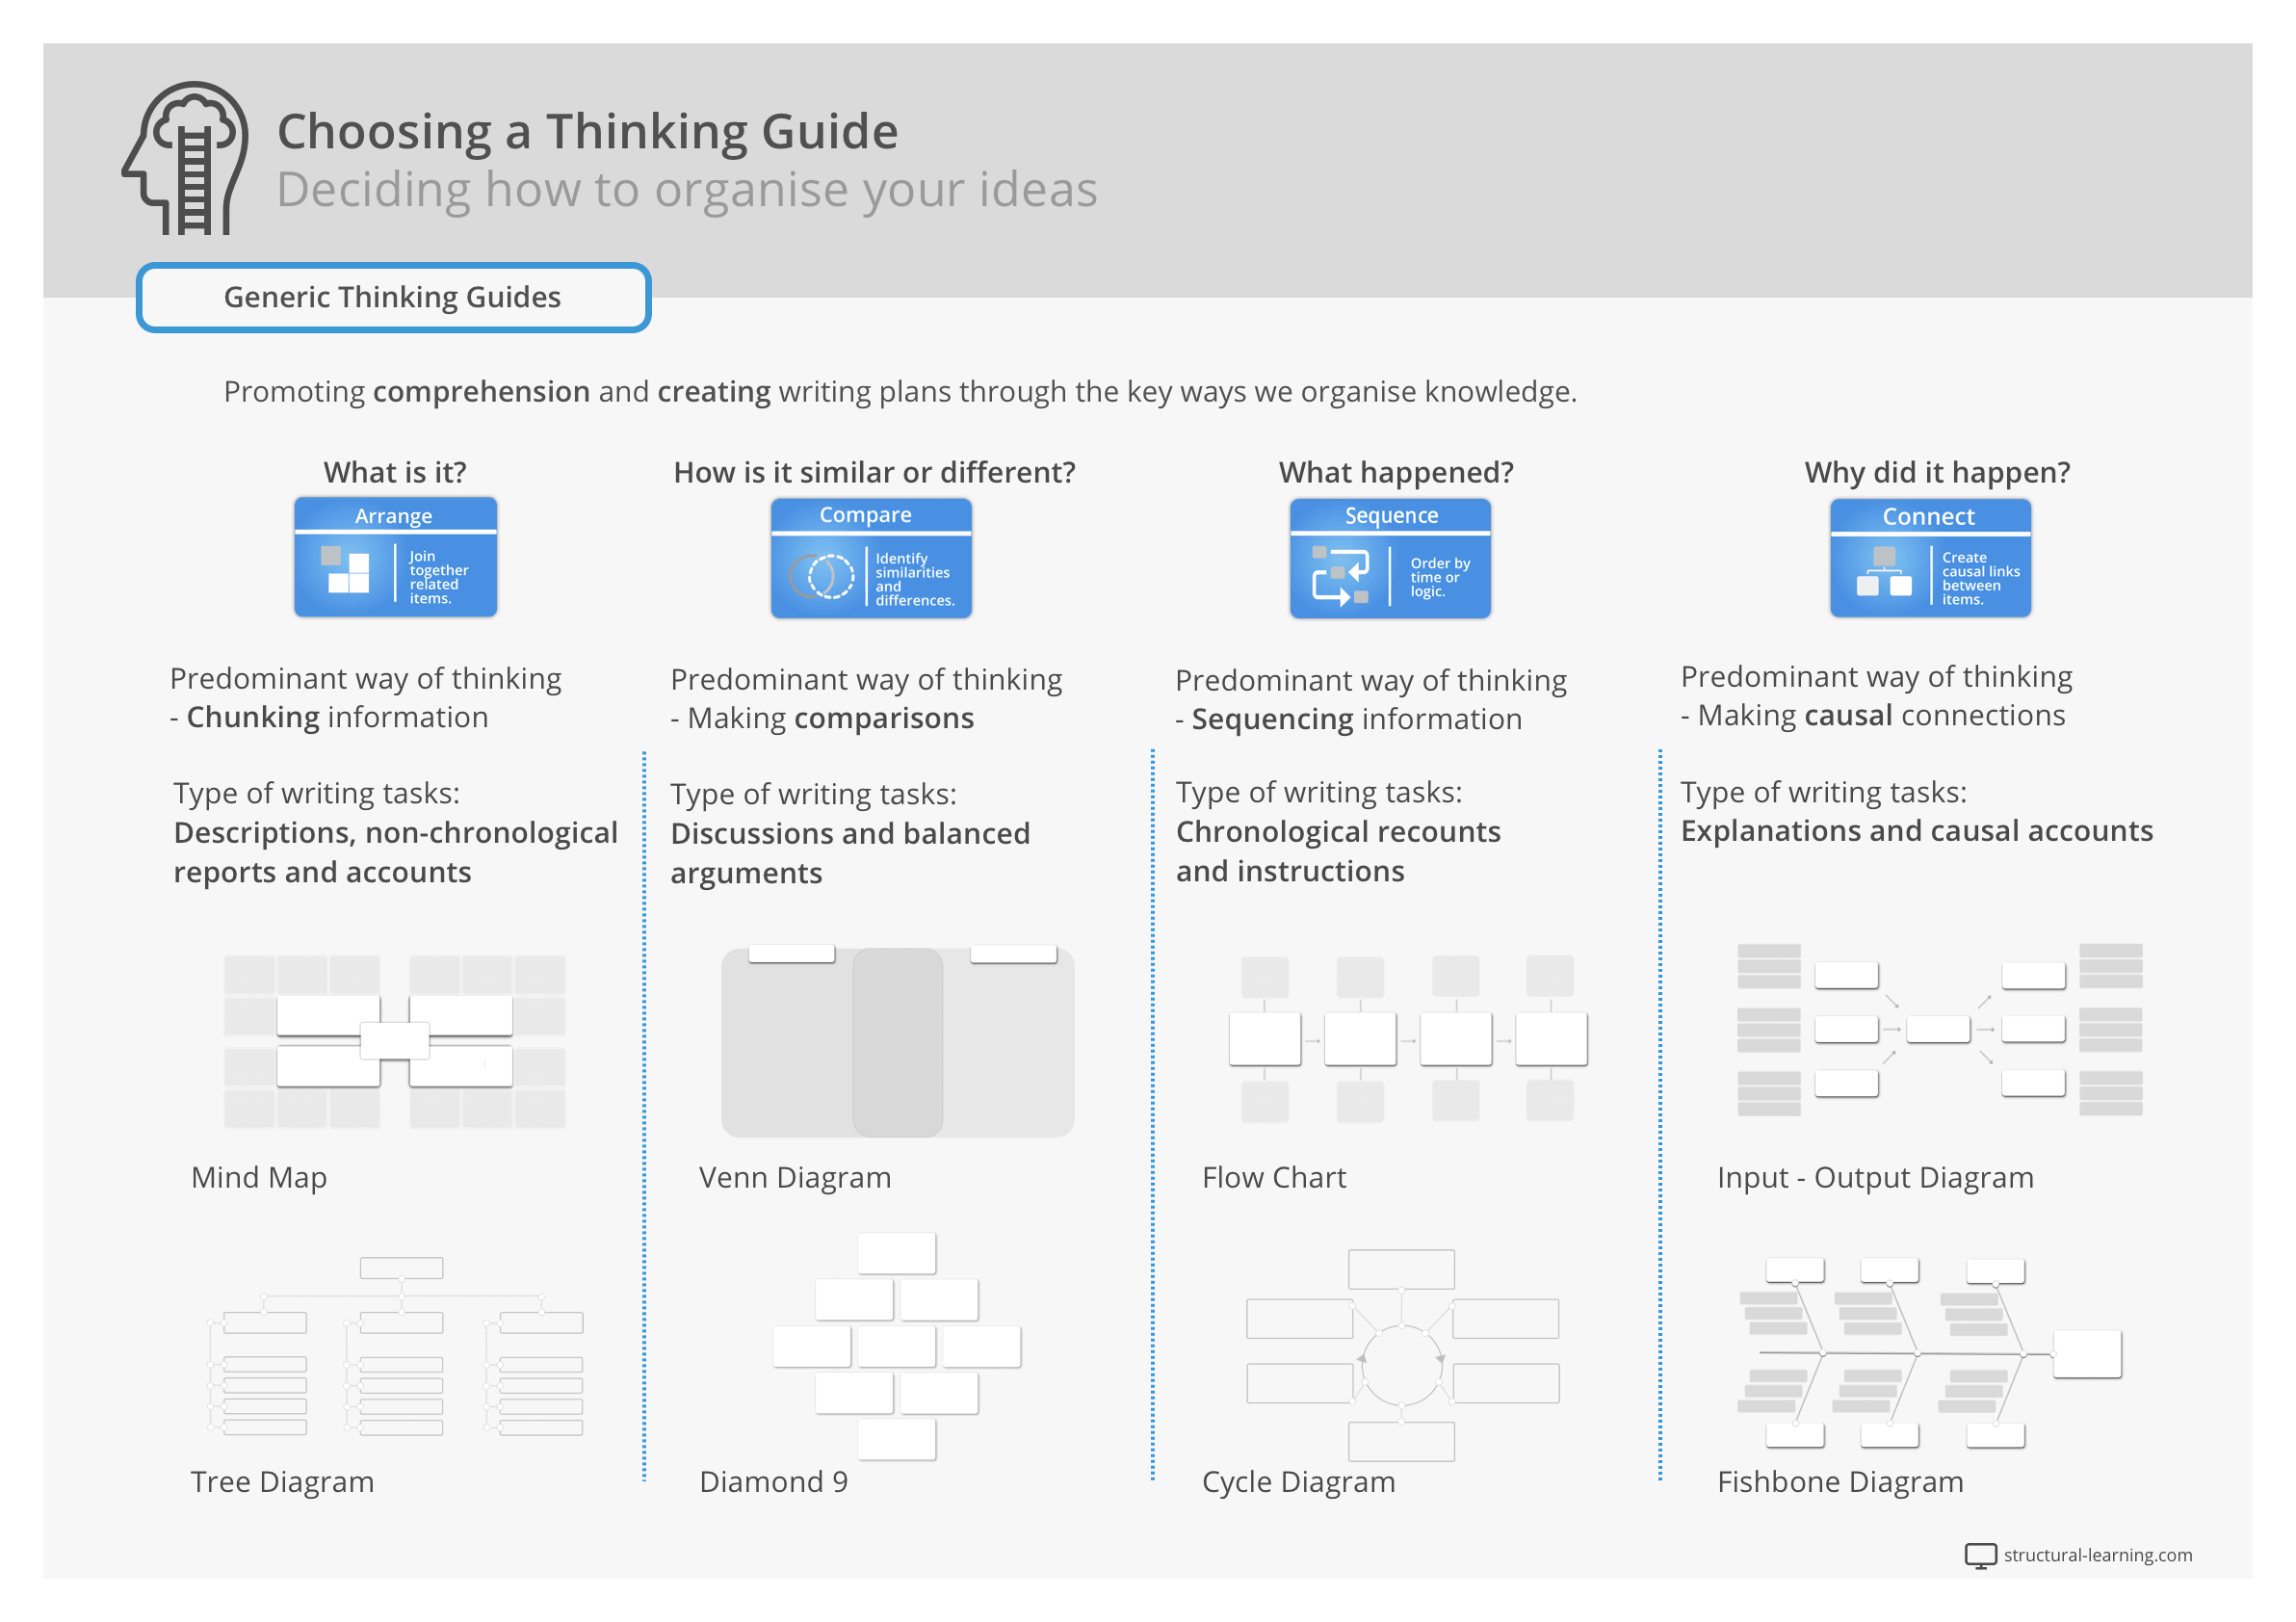 Reduce extraneous load with a graphic organiser